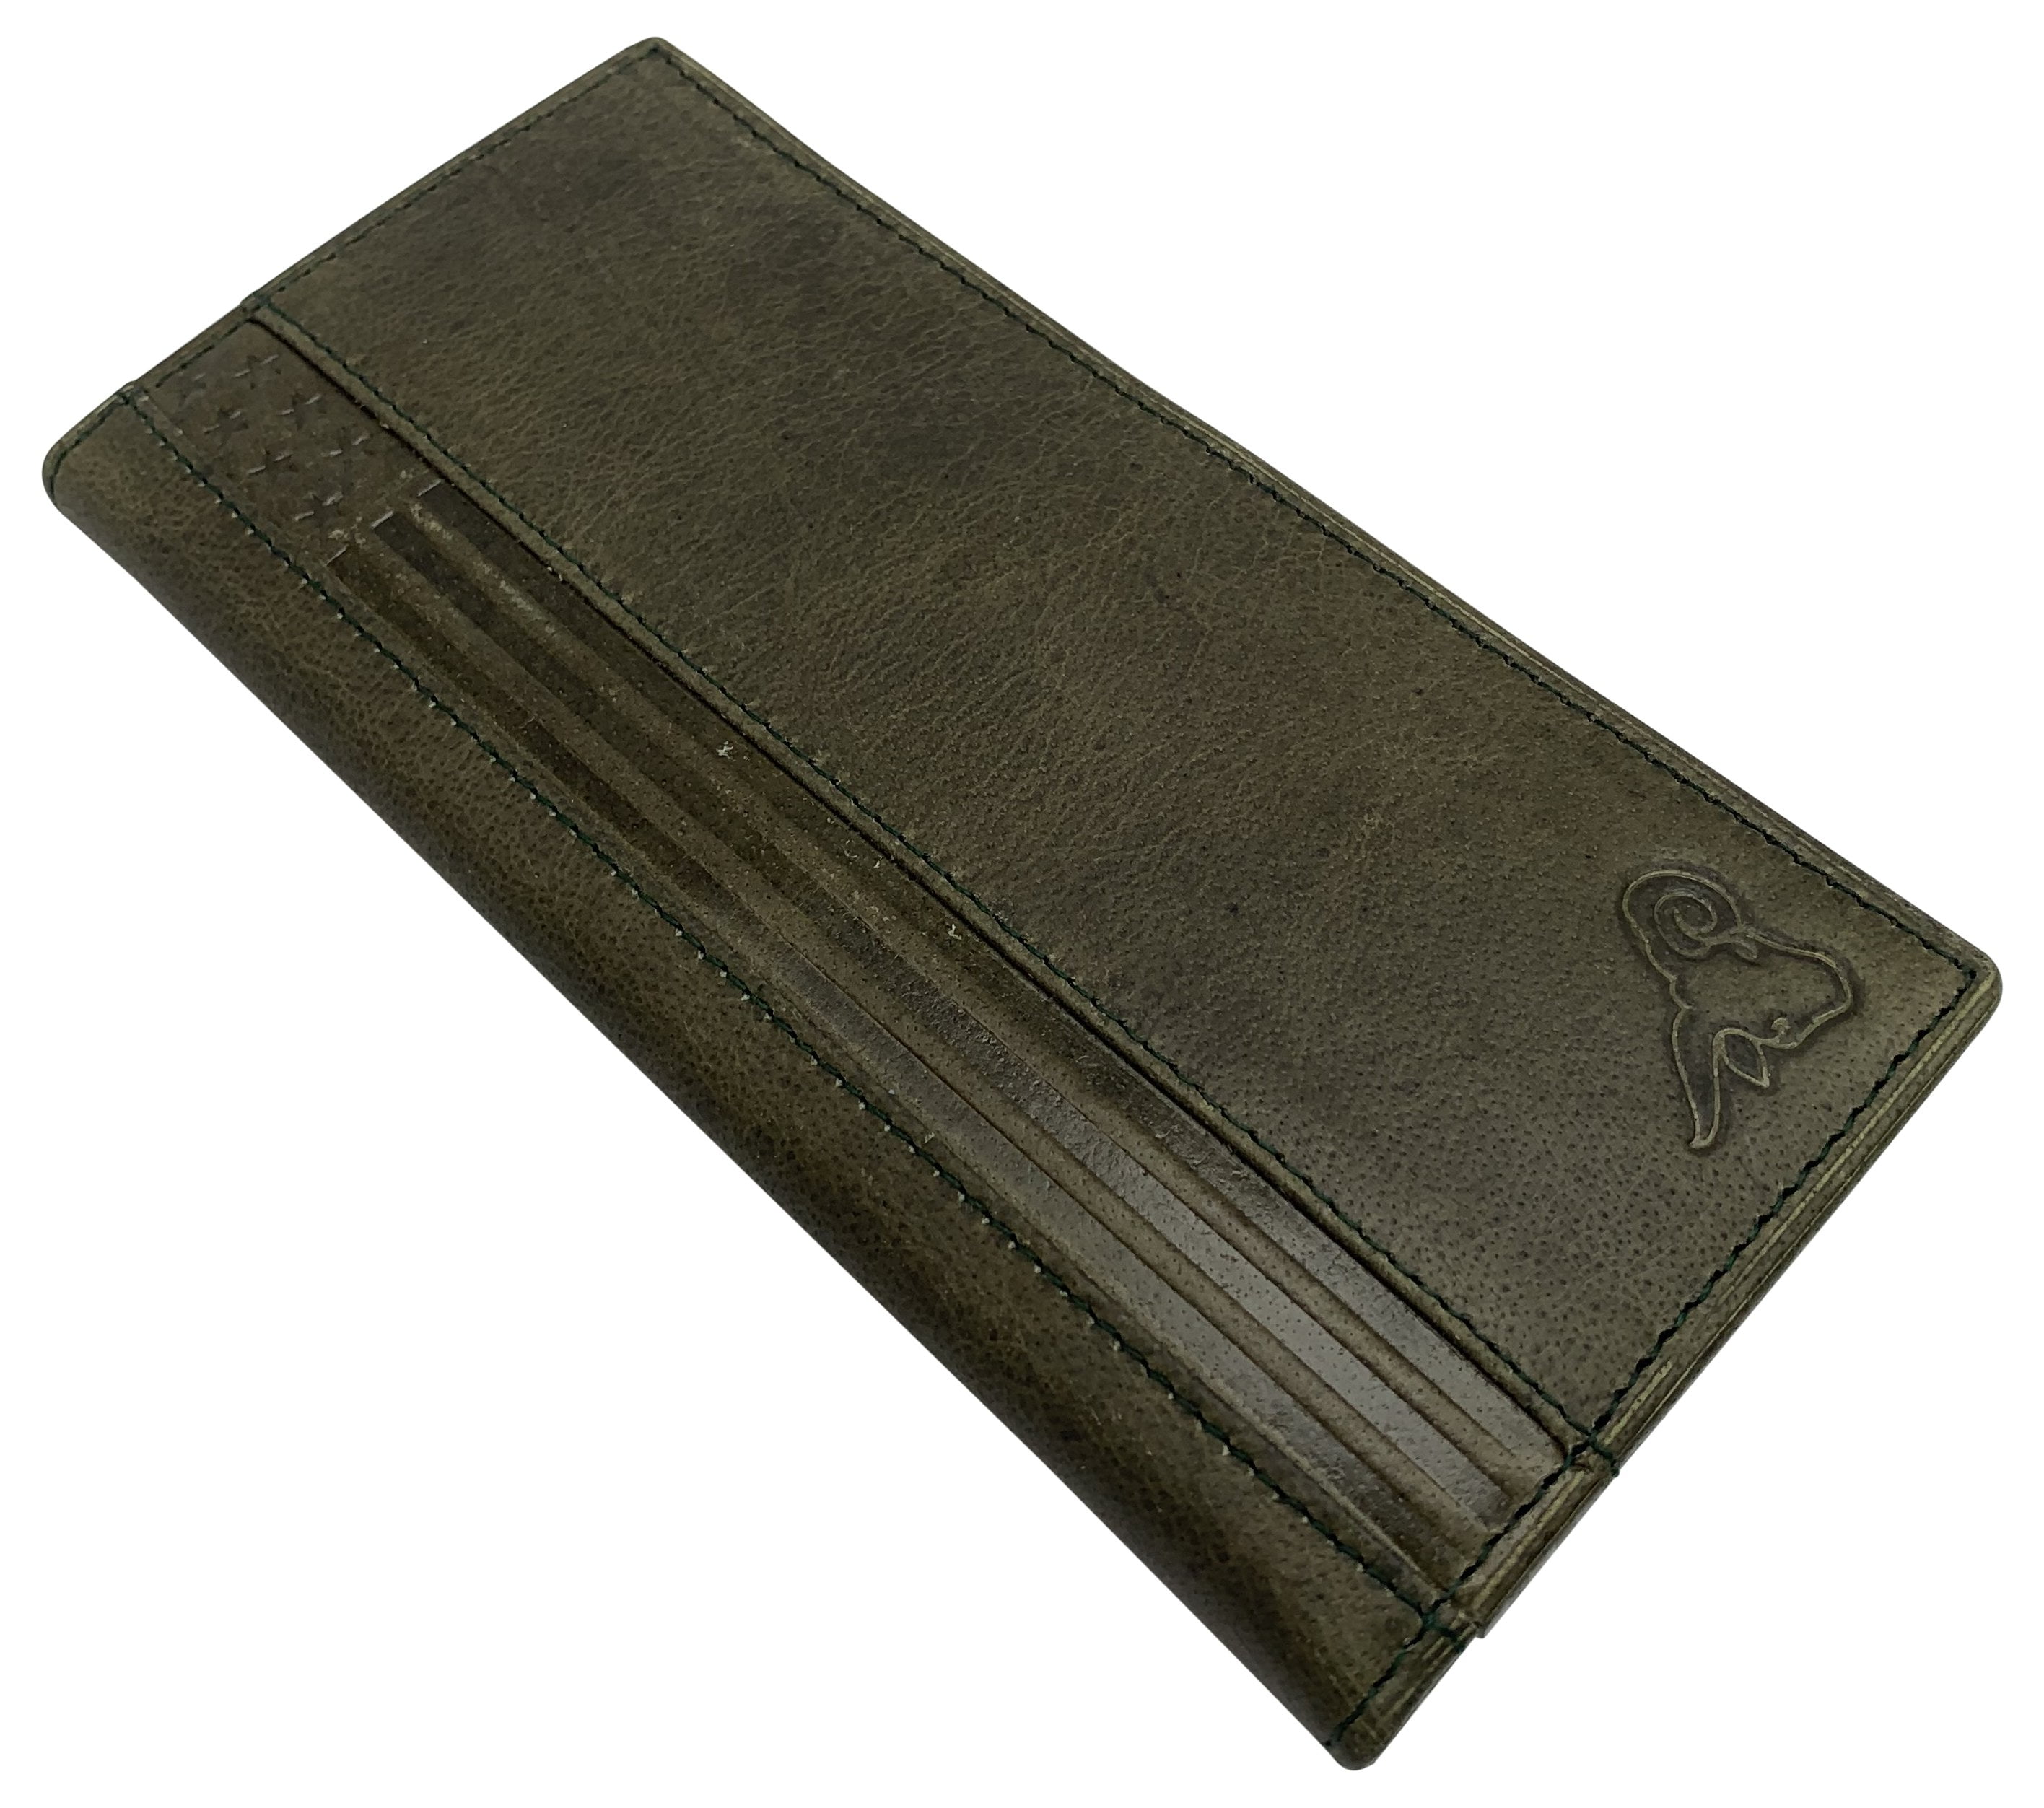 Genuine Leather Long Bifold Checkbook Cover Wallet Multi Card Pocket Holder  USA Series 